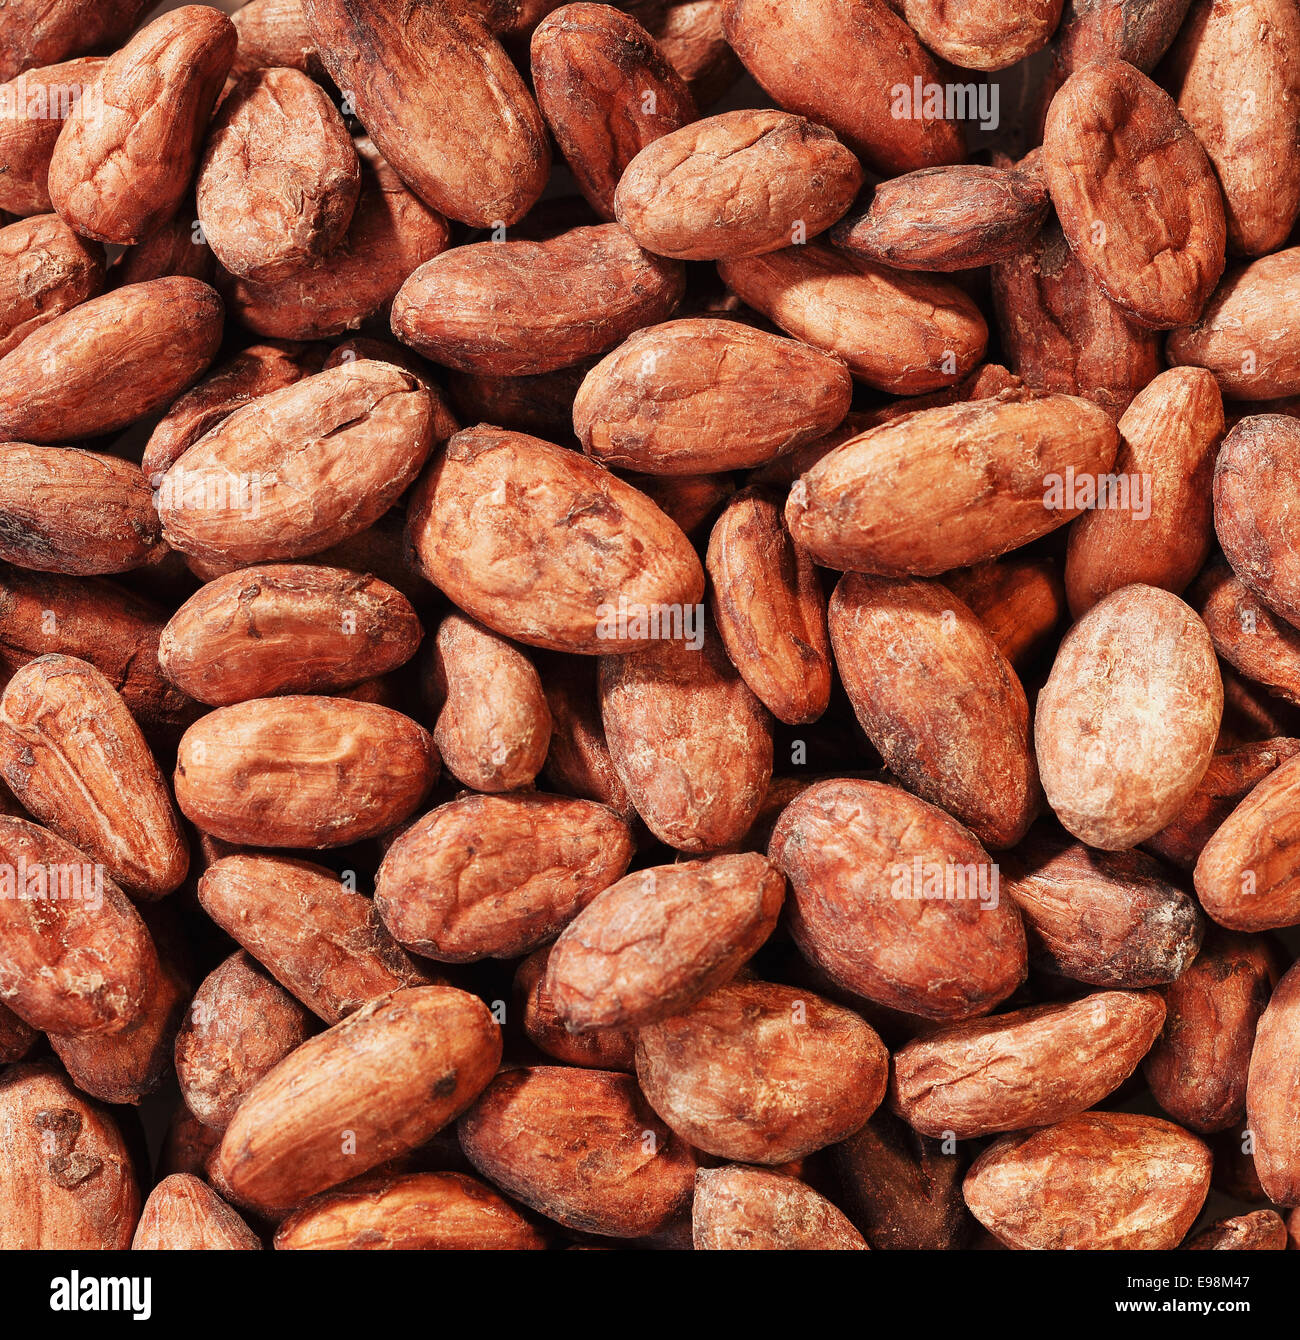 a Handful Cacao Beans full framed close up Stock Photo